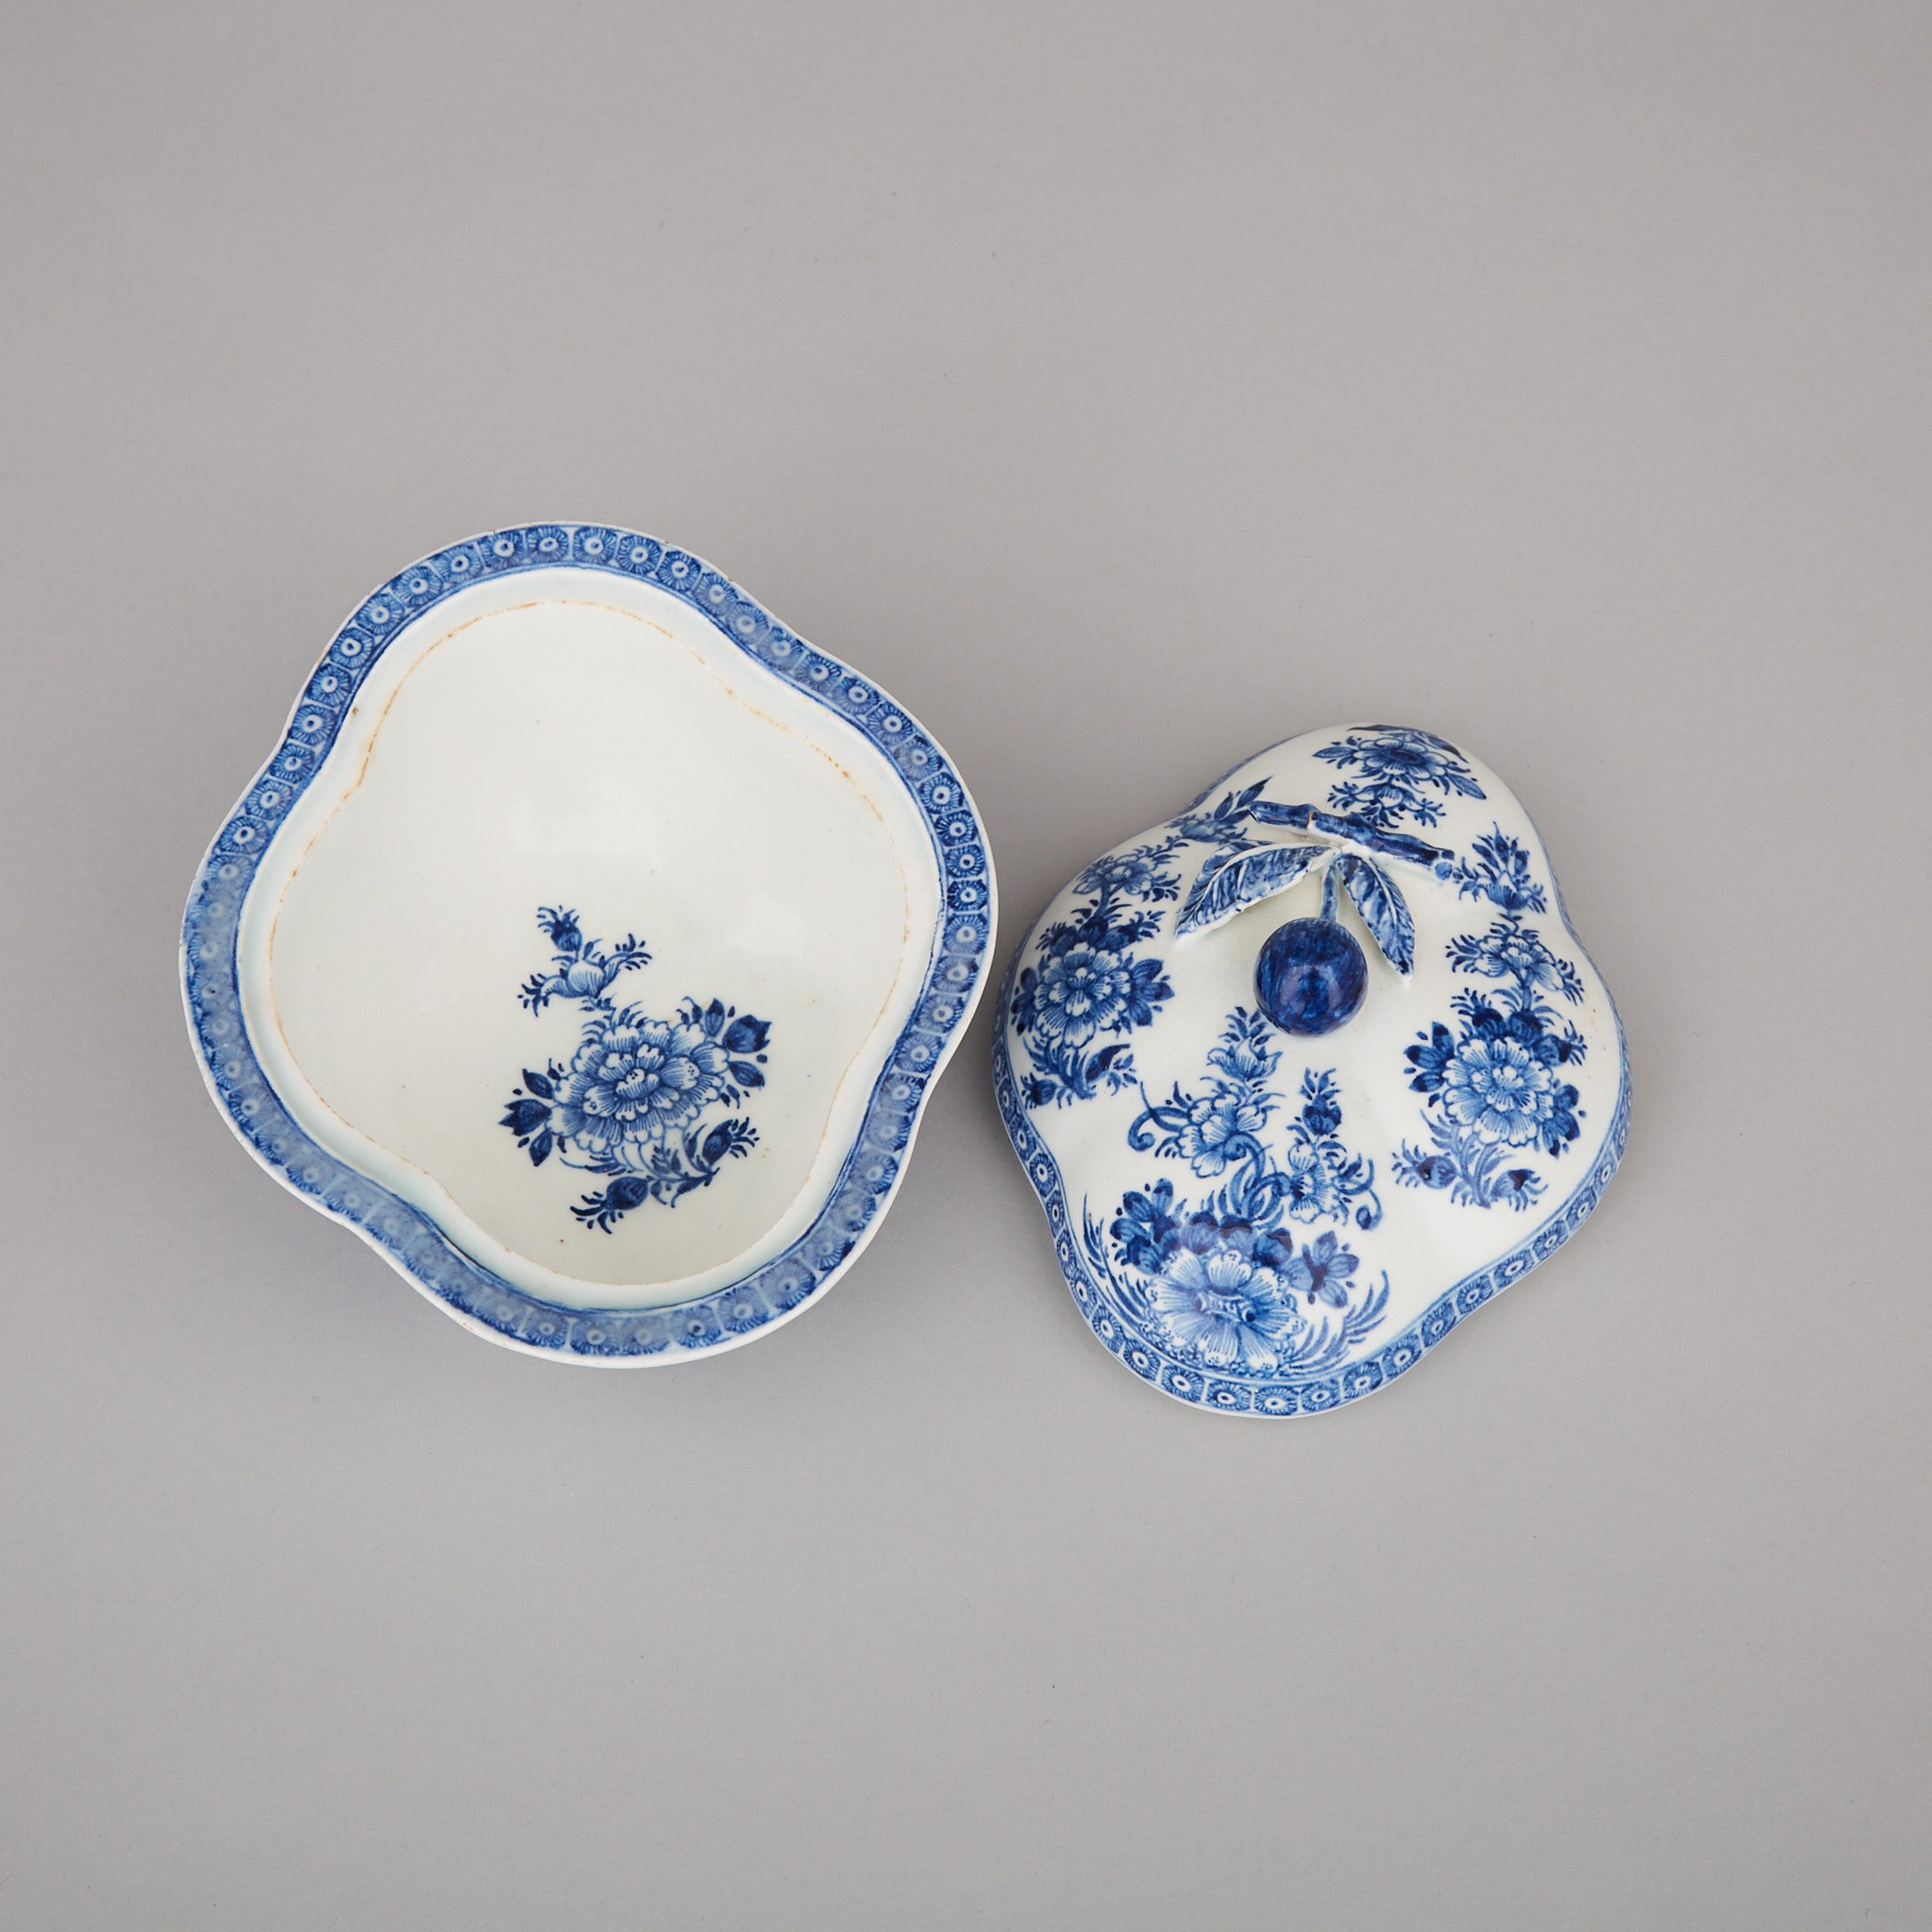 Bow Blue and White Quatrefoil Sauce Tureen and Cover, c.1765